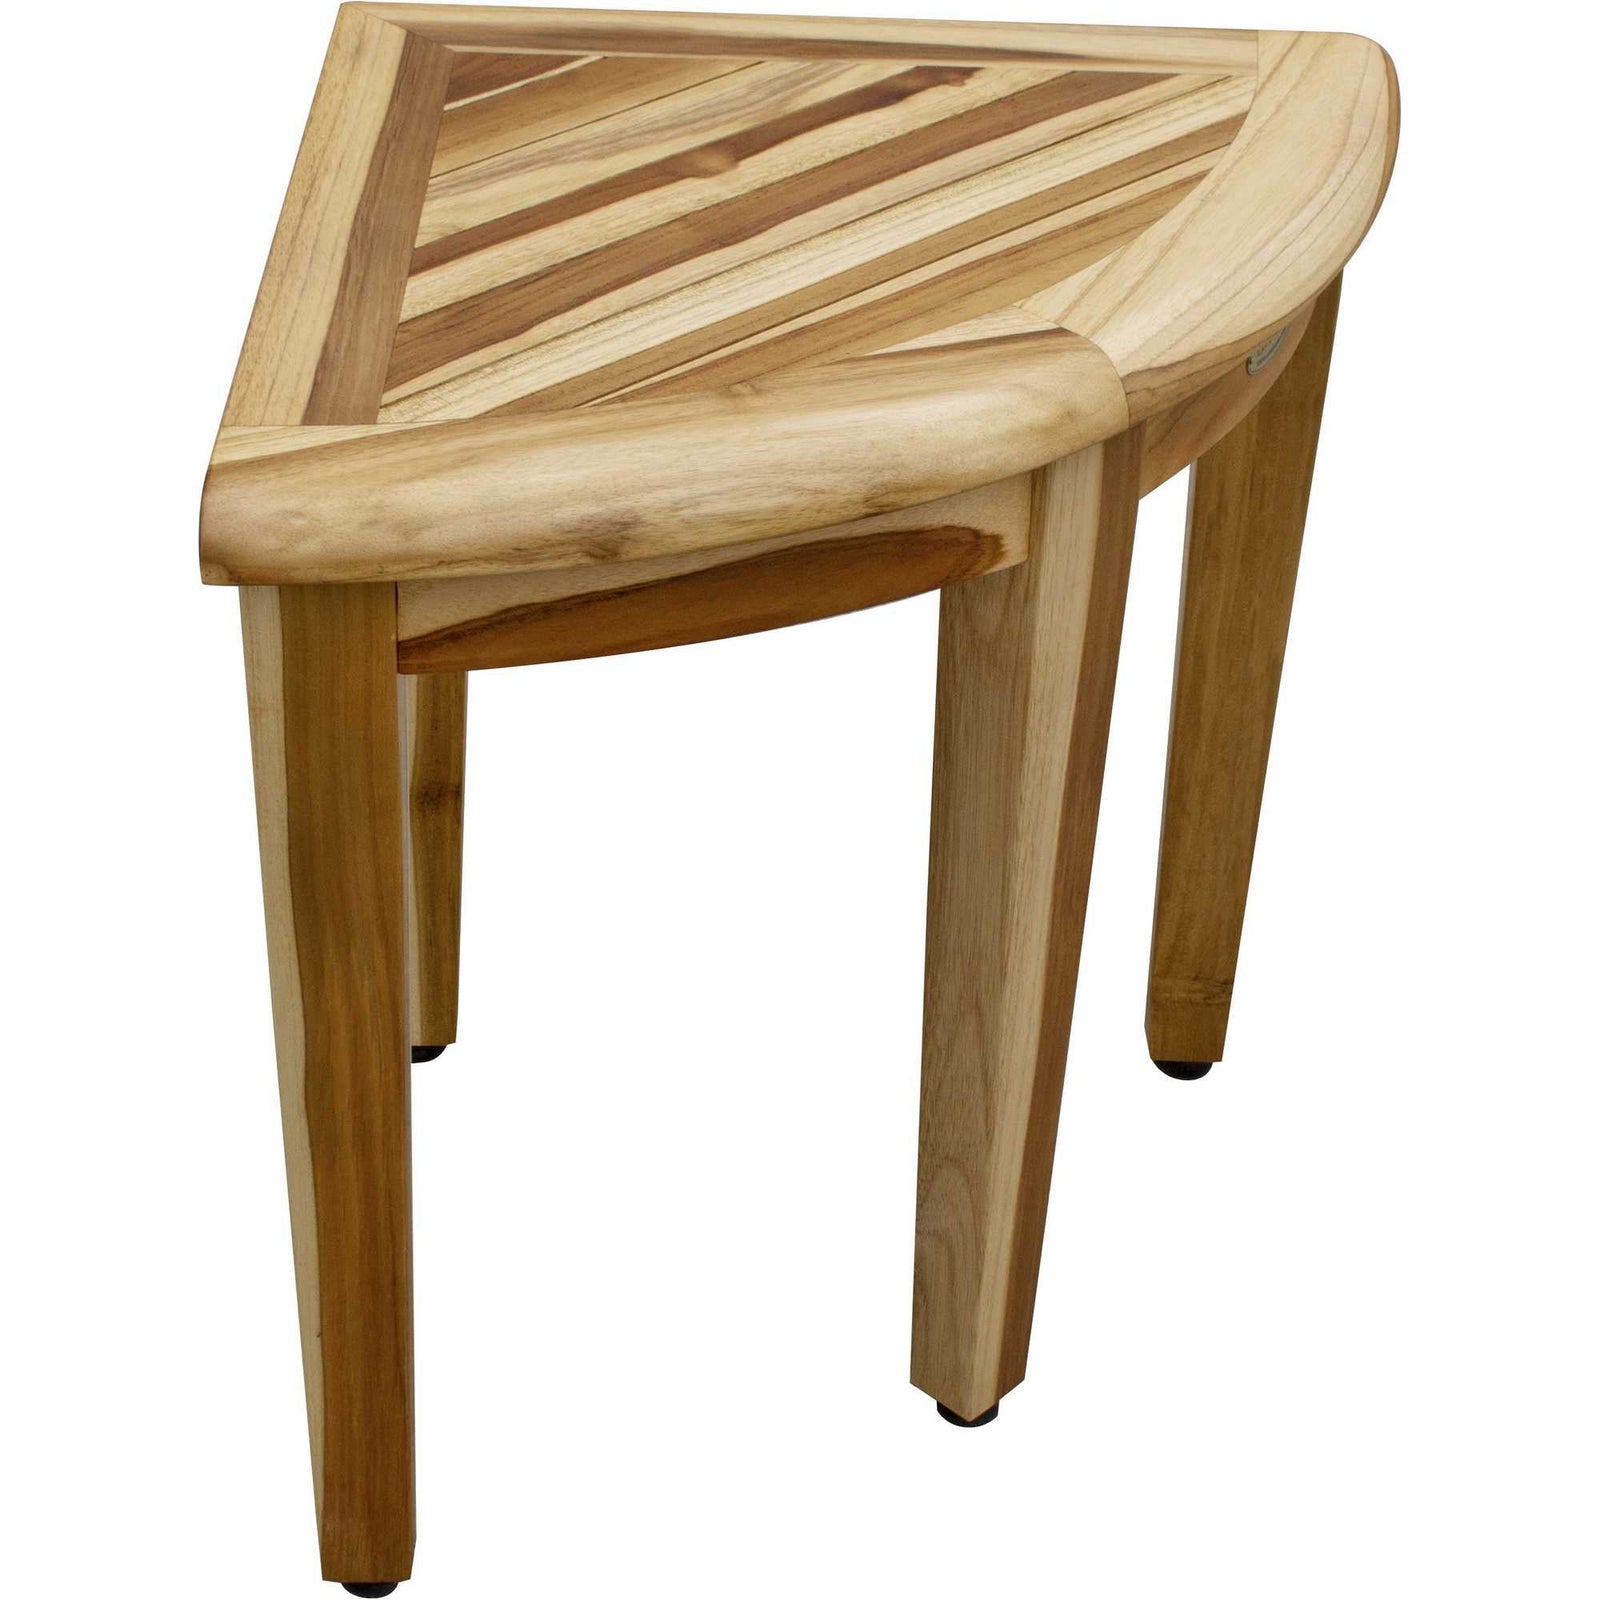 Compact Teak Corner Shower Stool with Shelf in Natural Finish 16"